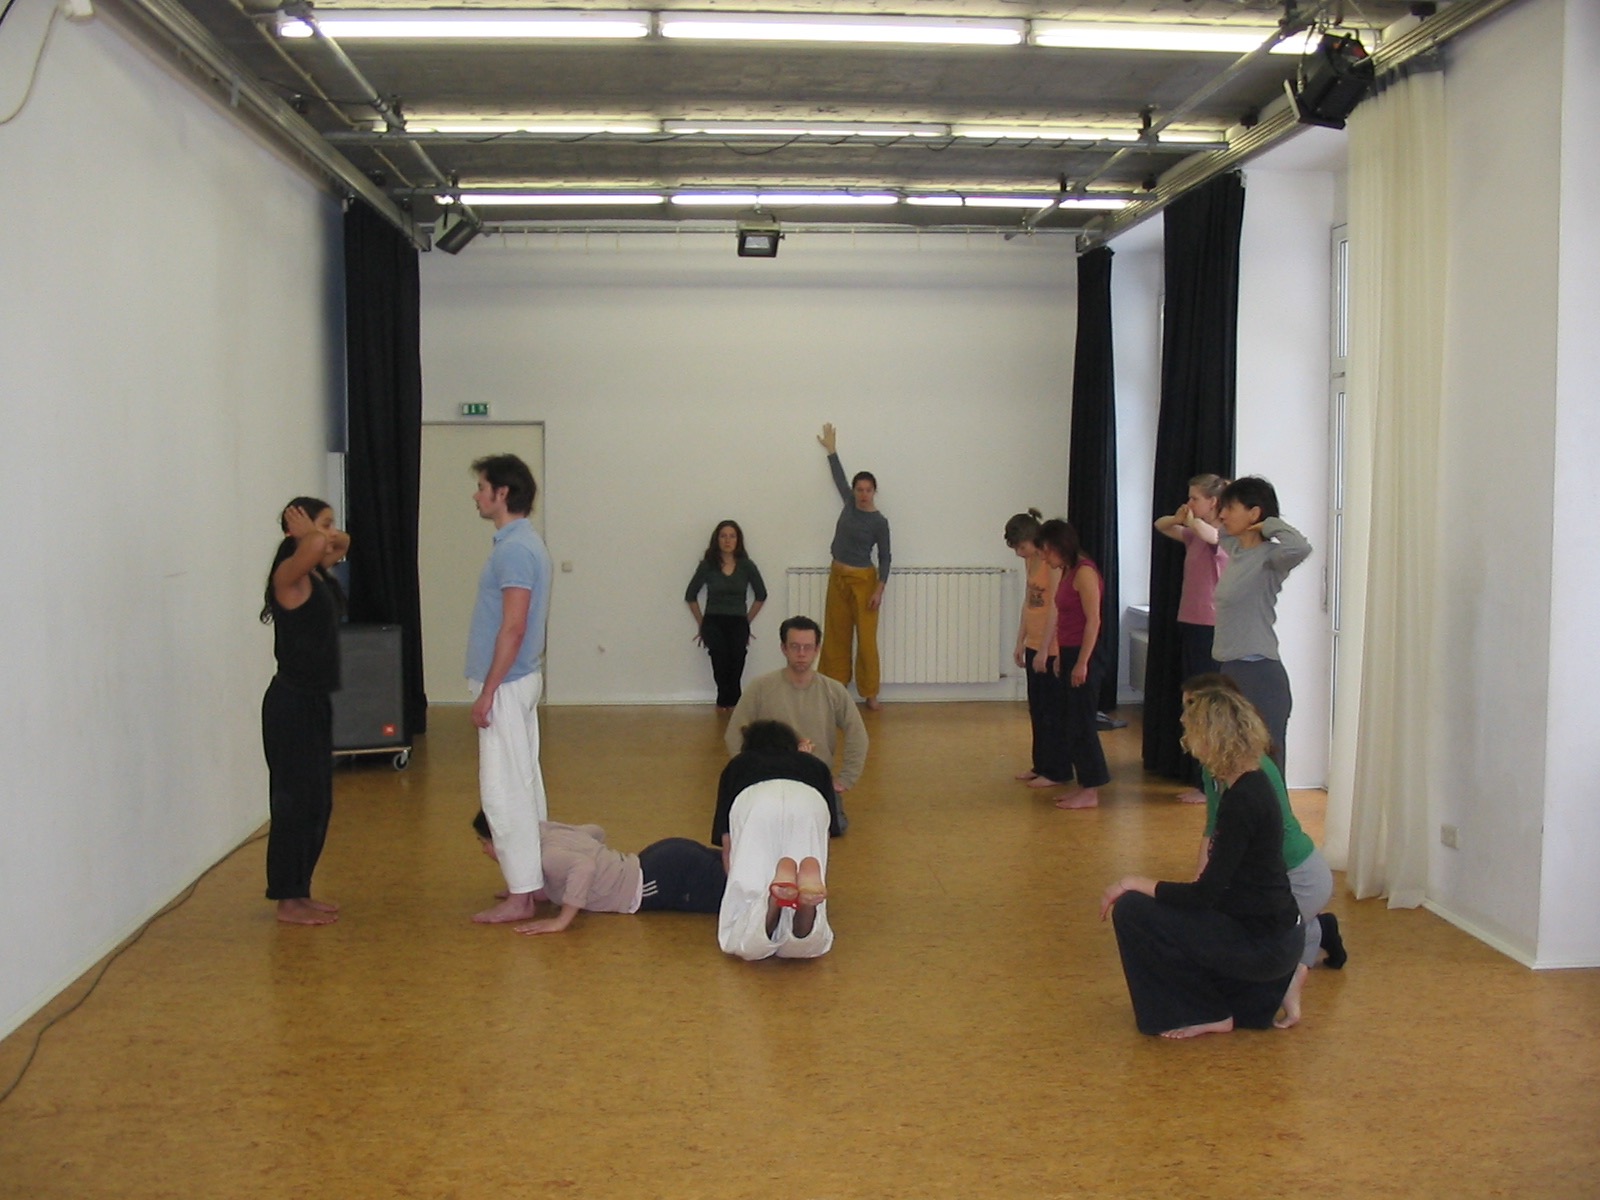   Students in a Viewpoints workshop I taught at Mime Centrum in March 2005.  